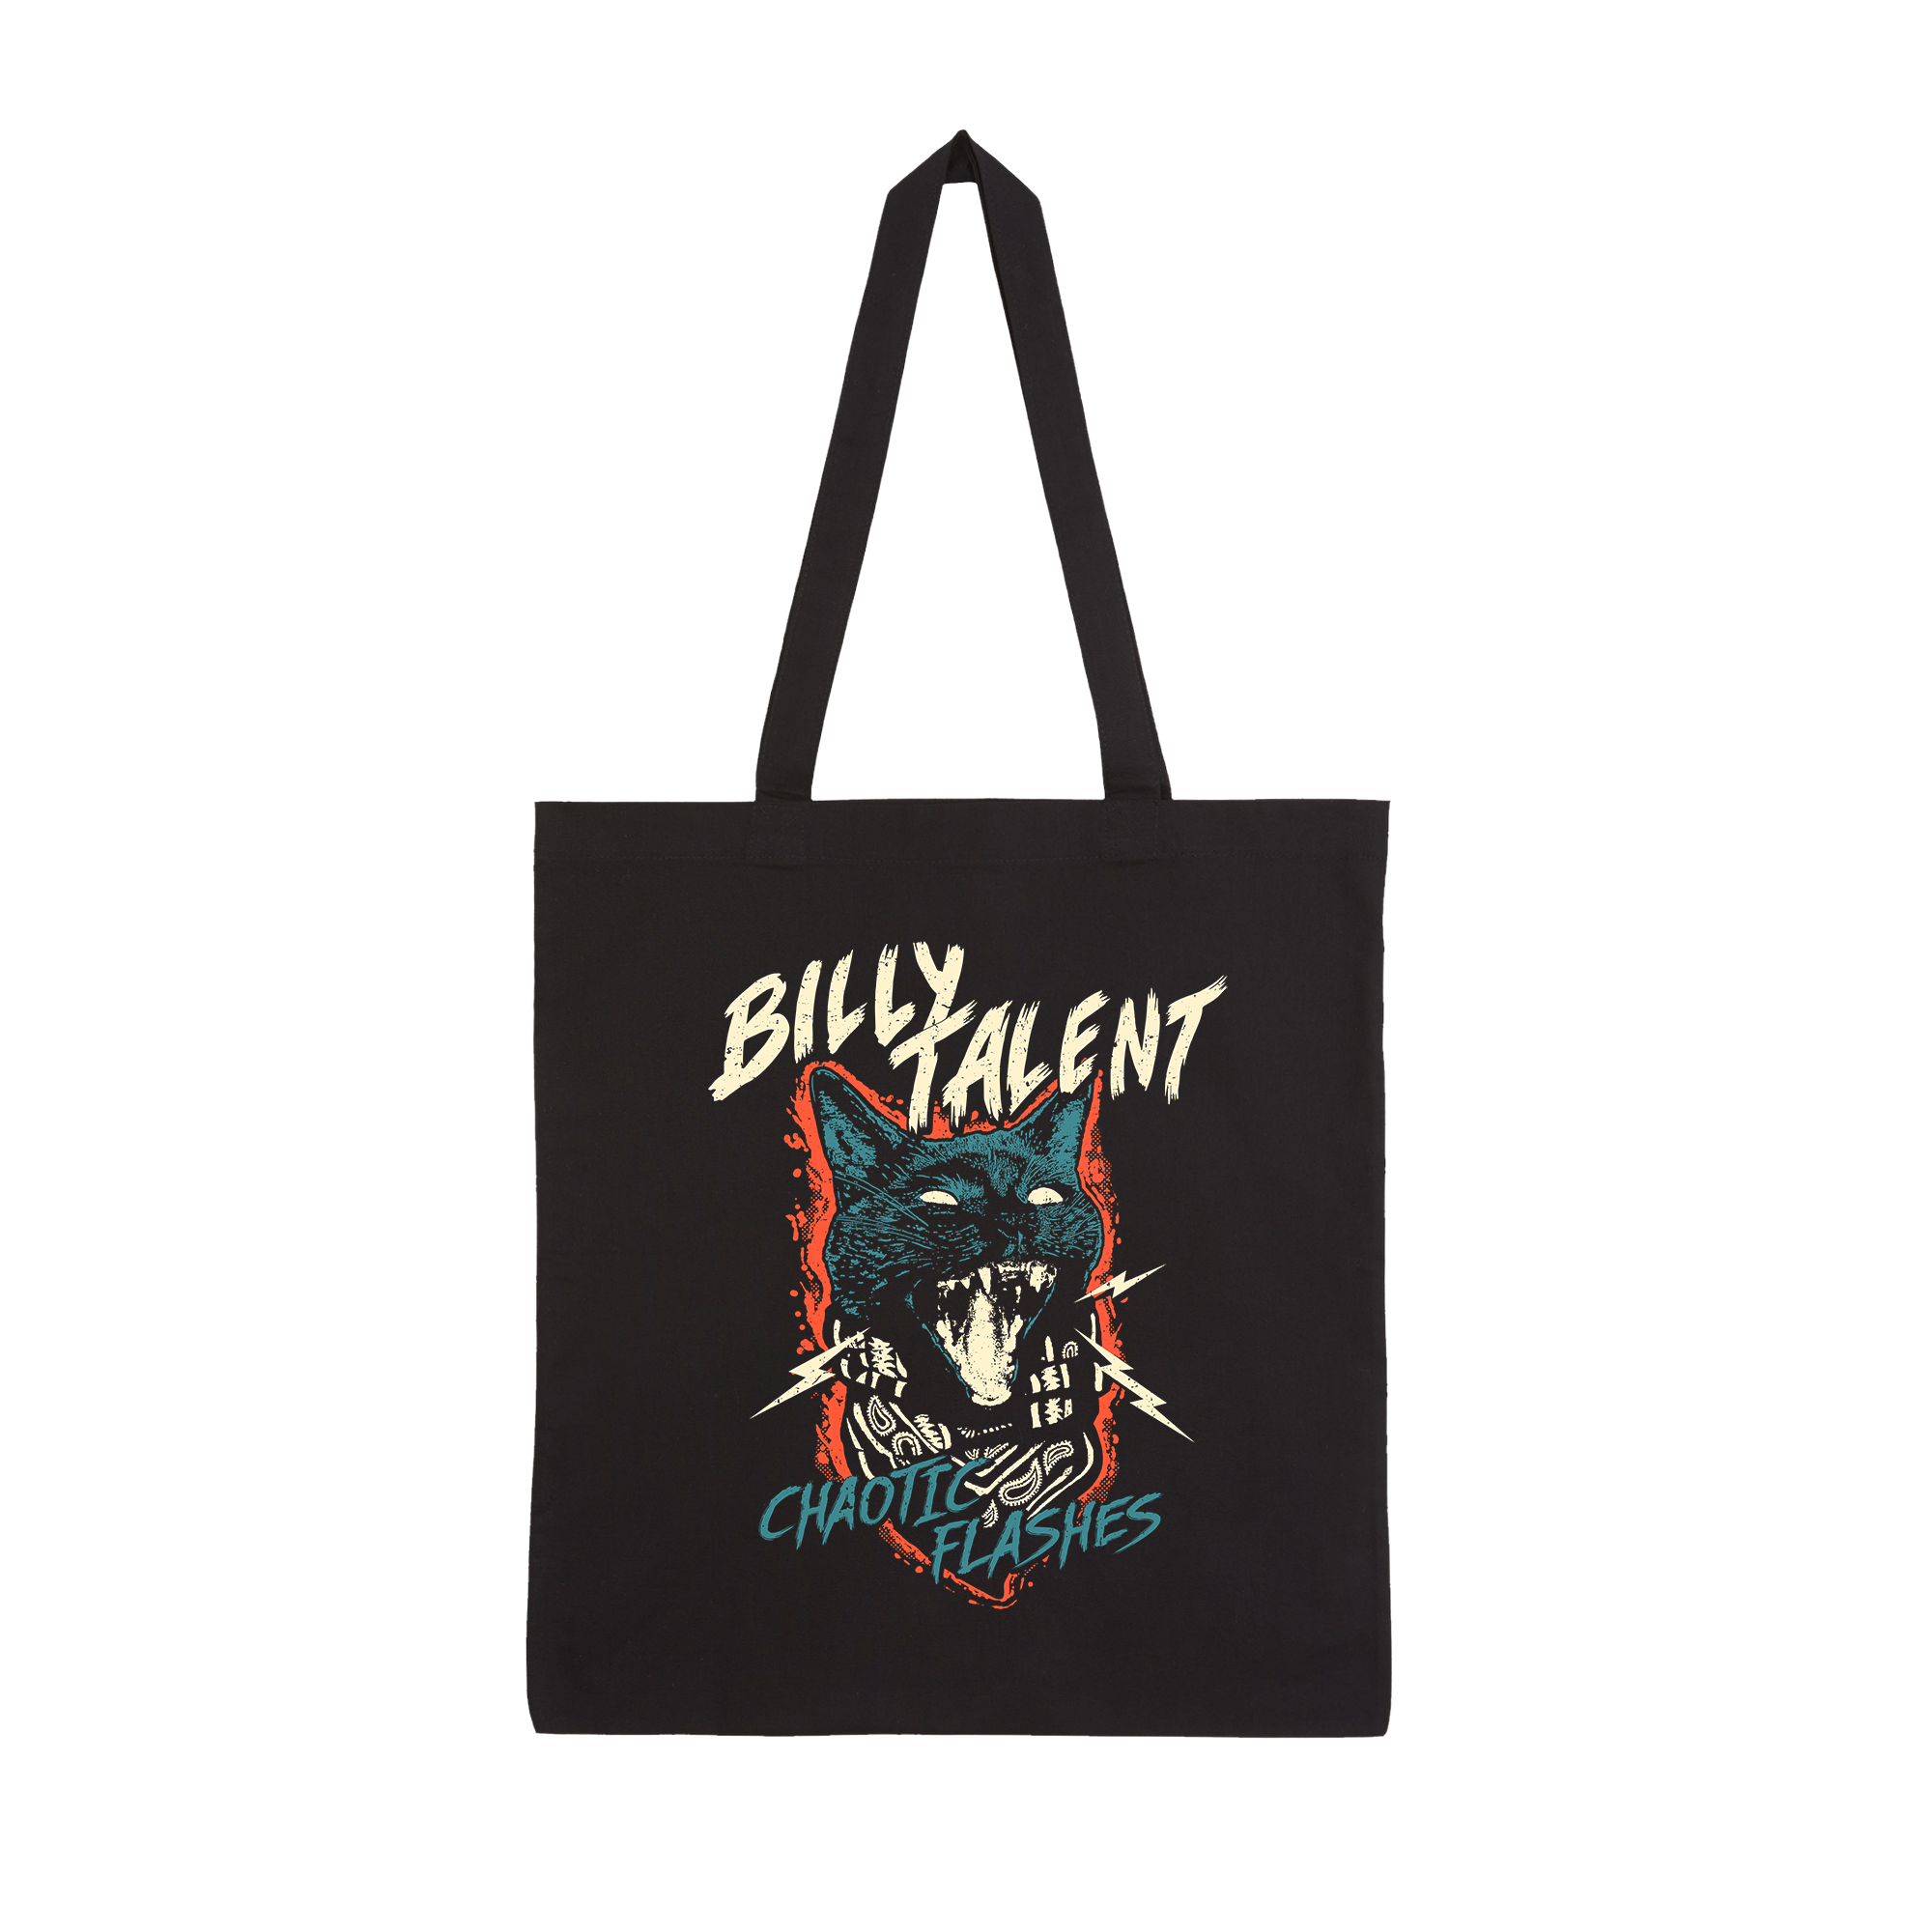 https://images.bravado.de/prod/product-assets/product-asset-data/billy-talent/billy-talent/products/507243/web/433706/image-thumb__433706__3000x3000_original/Billy-Talent-ToteBag-Chaotic-Flashes-Beutel-mehrfarbig-507243-433706.aad49679.png